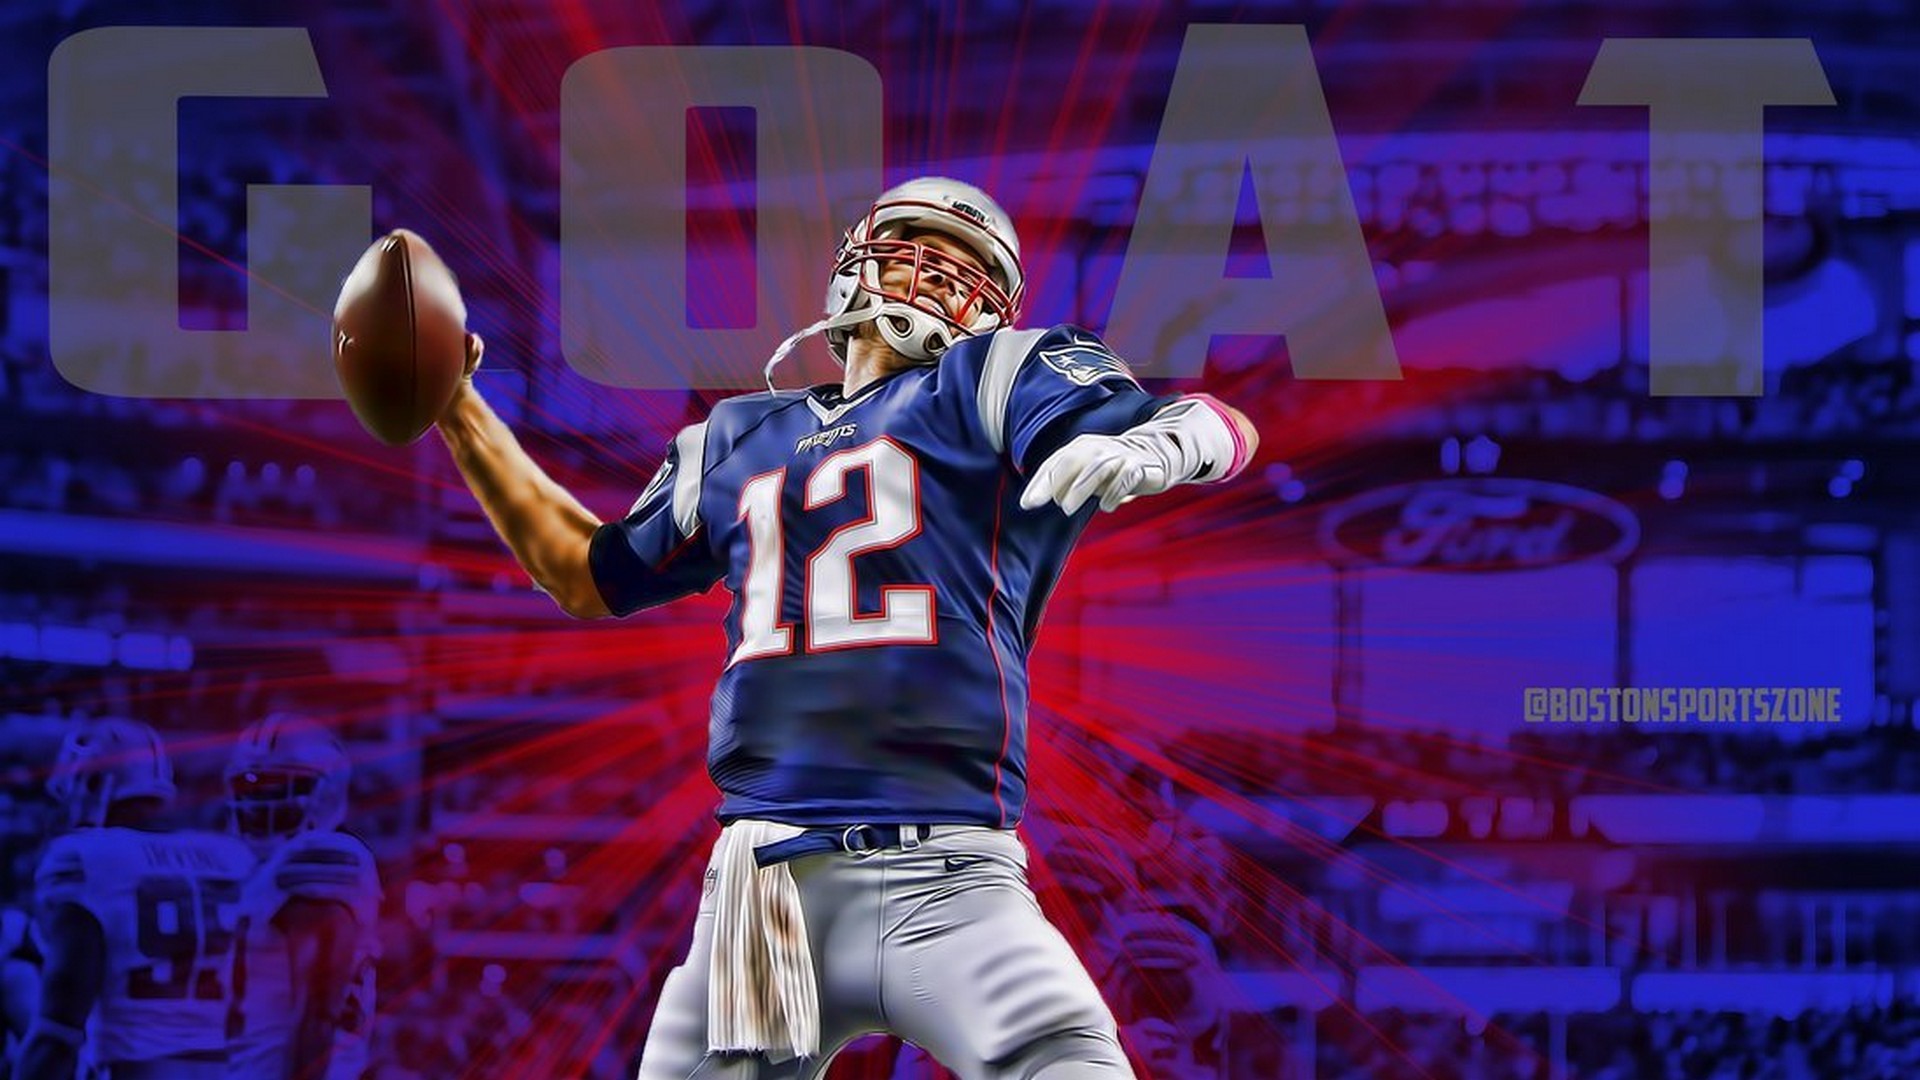 Wallpaper Tom Brady Patriots Desktop with resolution 1920X1080 pixel. You can use this wallpaper as background for your desktop Computer Screensavers, Android or iPhone smartphones